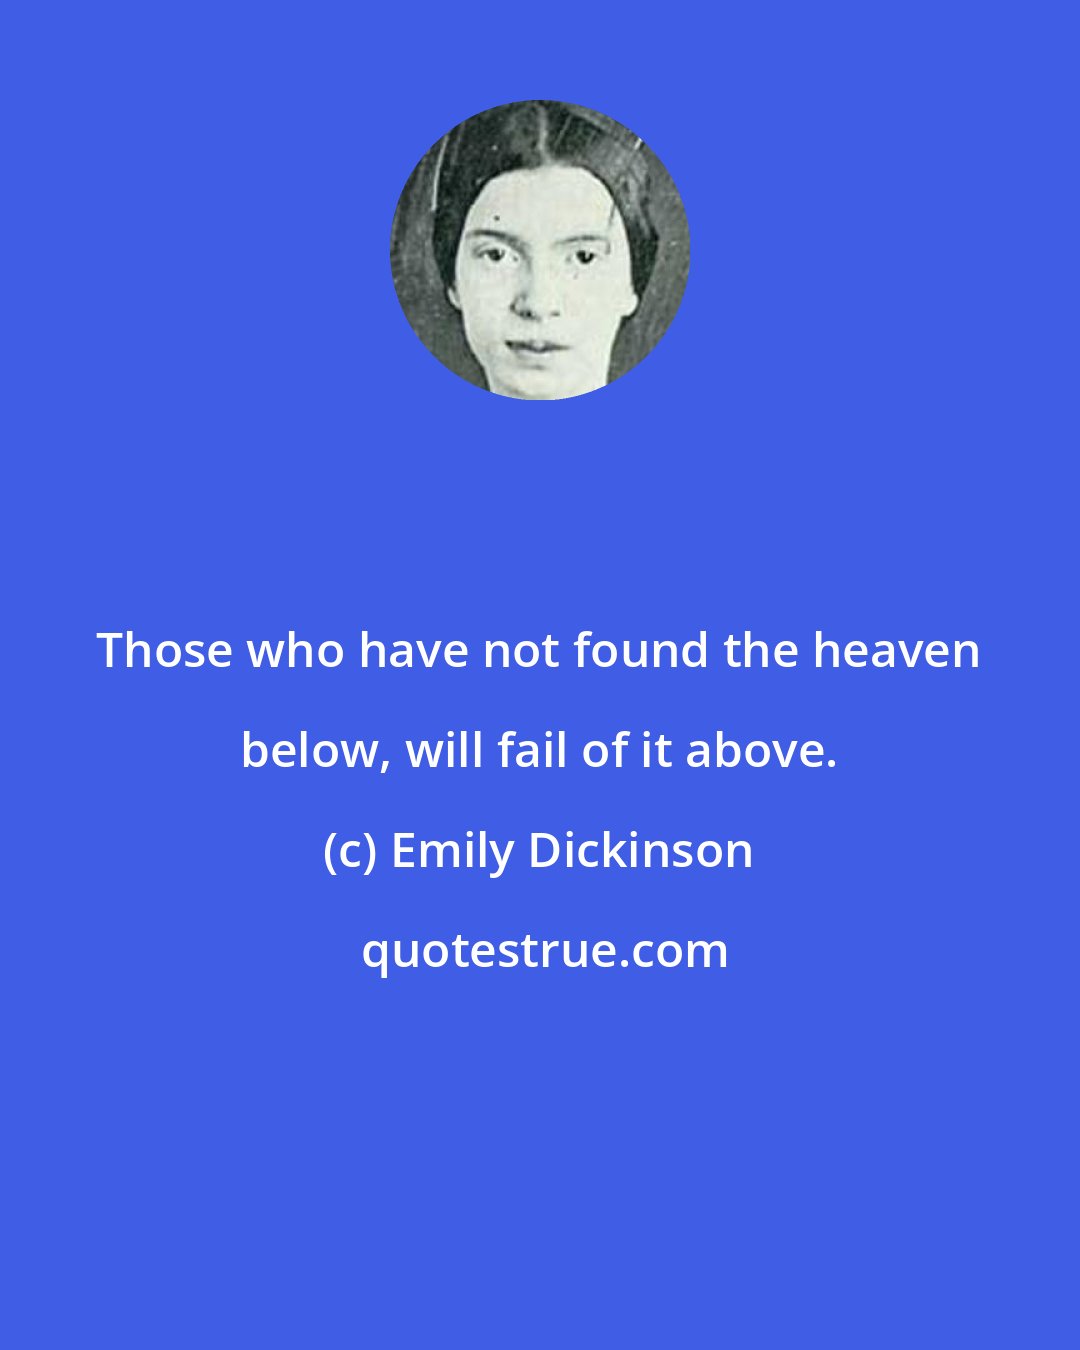 Emily Dickinson: Those who have not found the heaven below, will fail of it above.